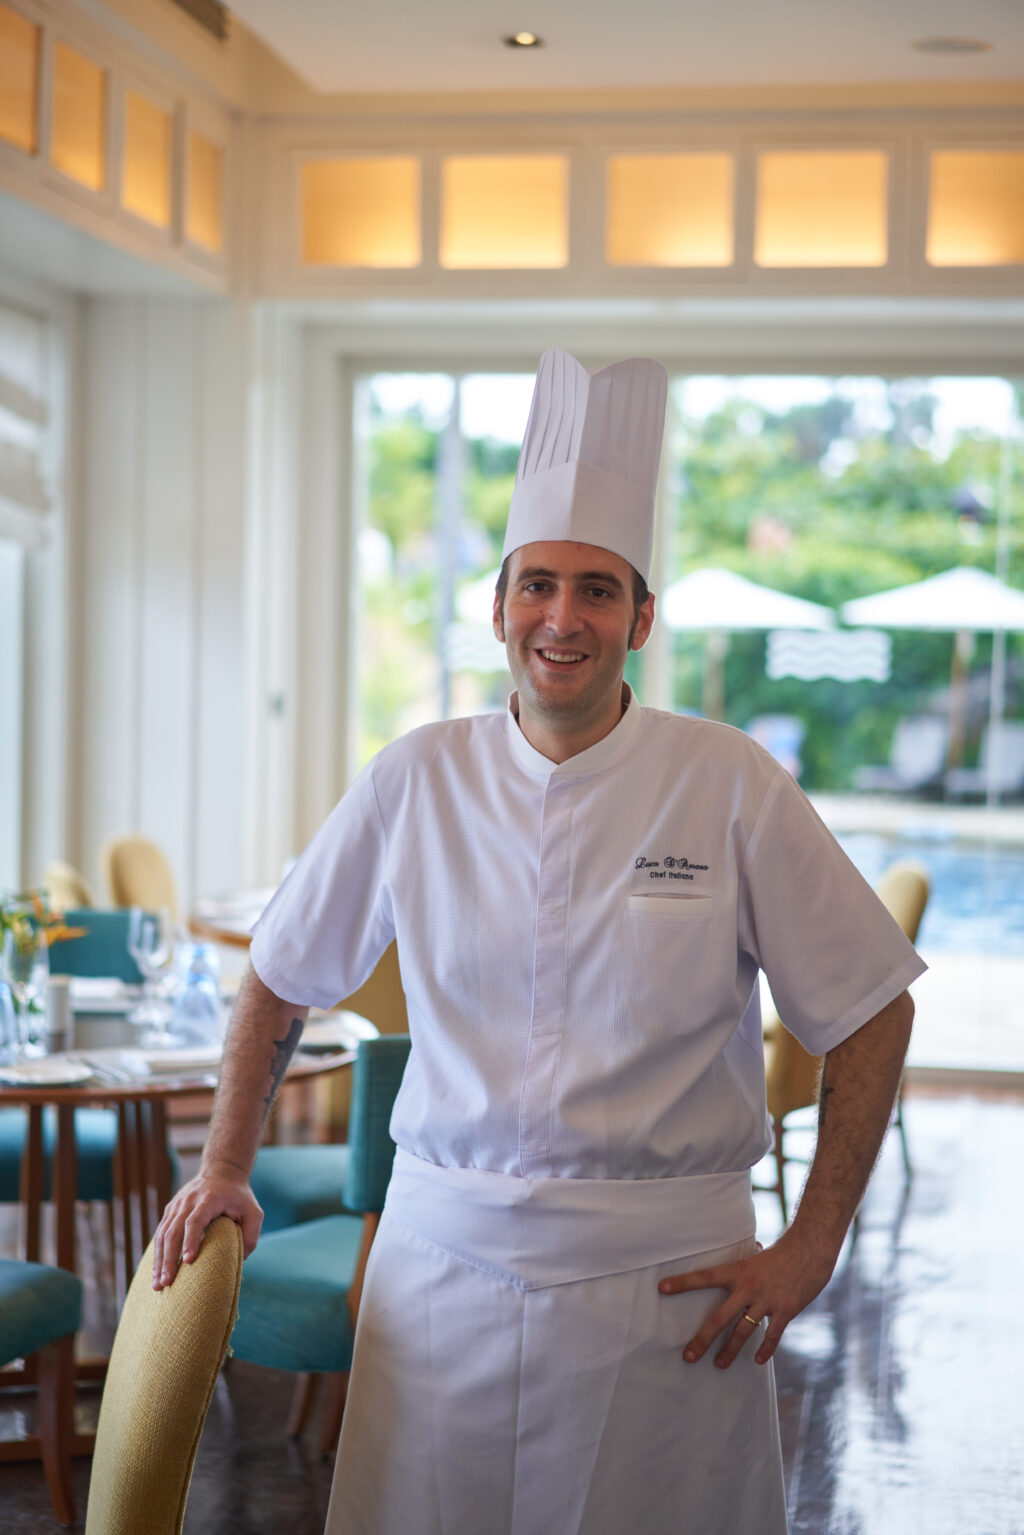 Shangri-La Mactan Cebu’s new Italian Chef, Luca D'Amora poses for a photo at the dining are of Acqua with the view of the pool behind him.